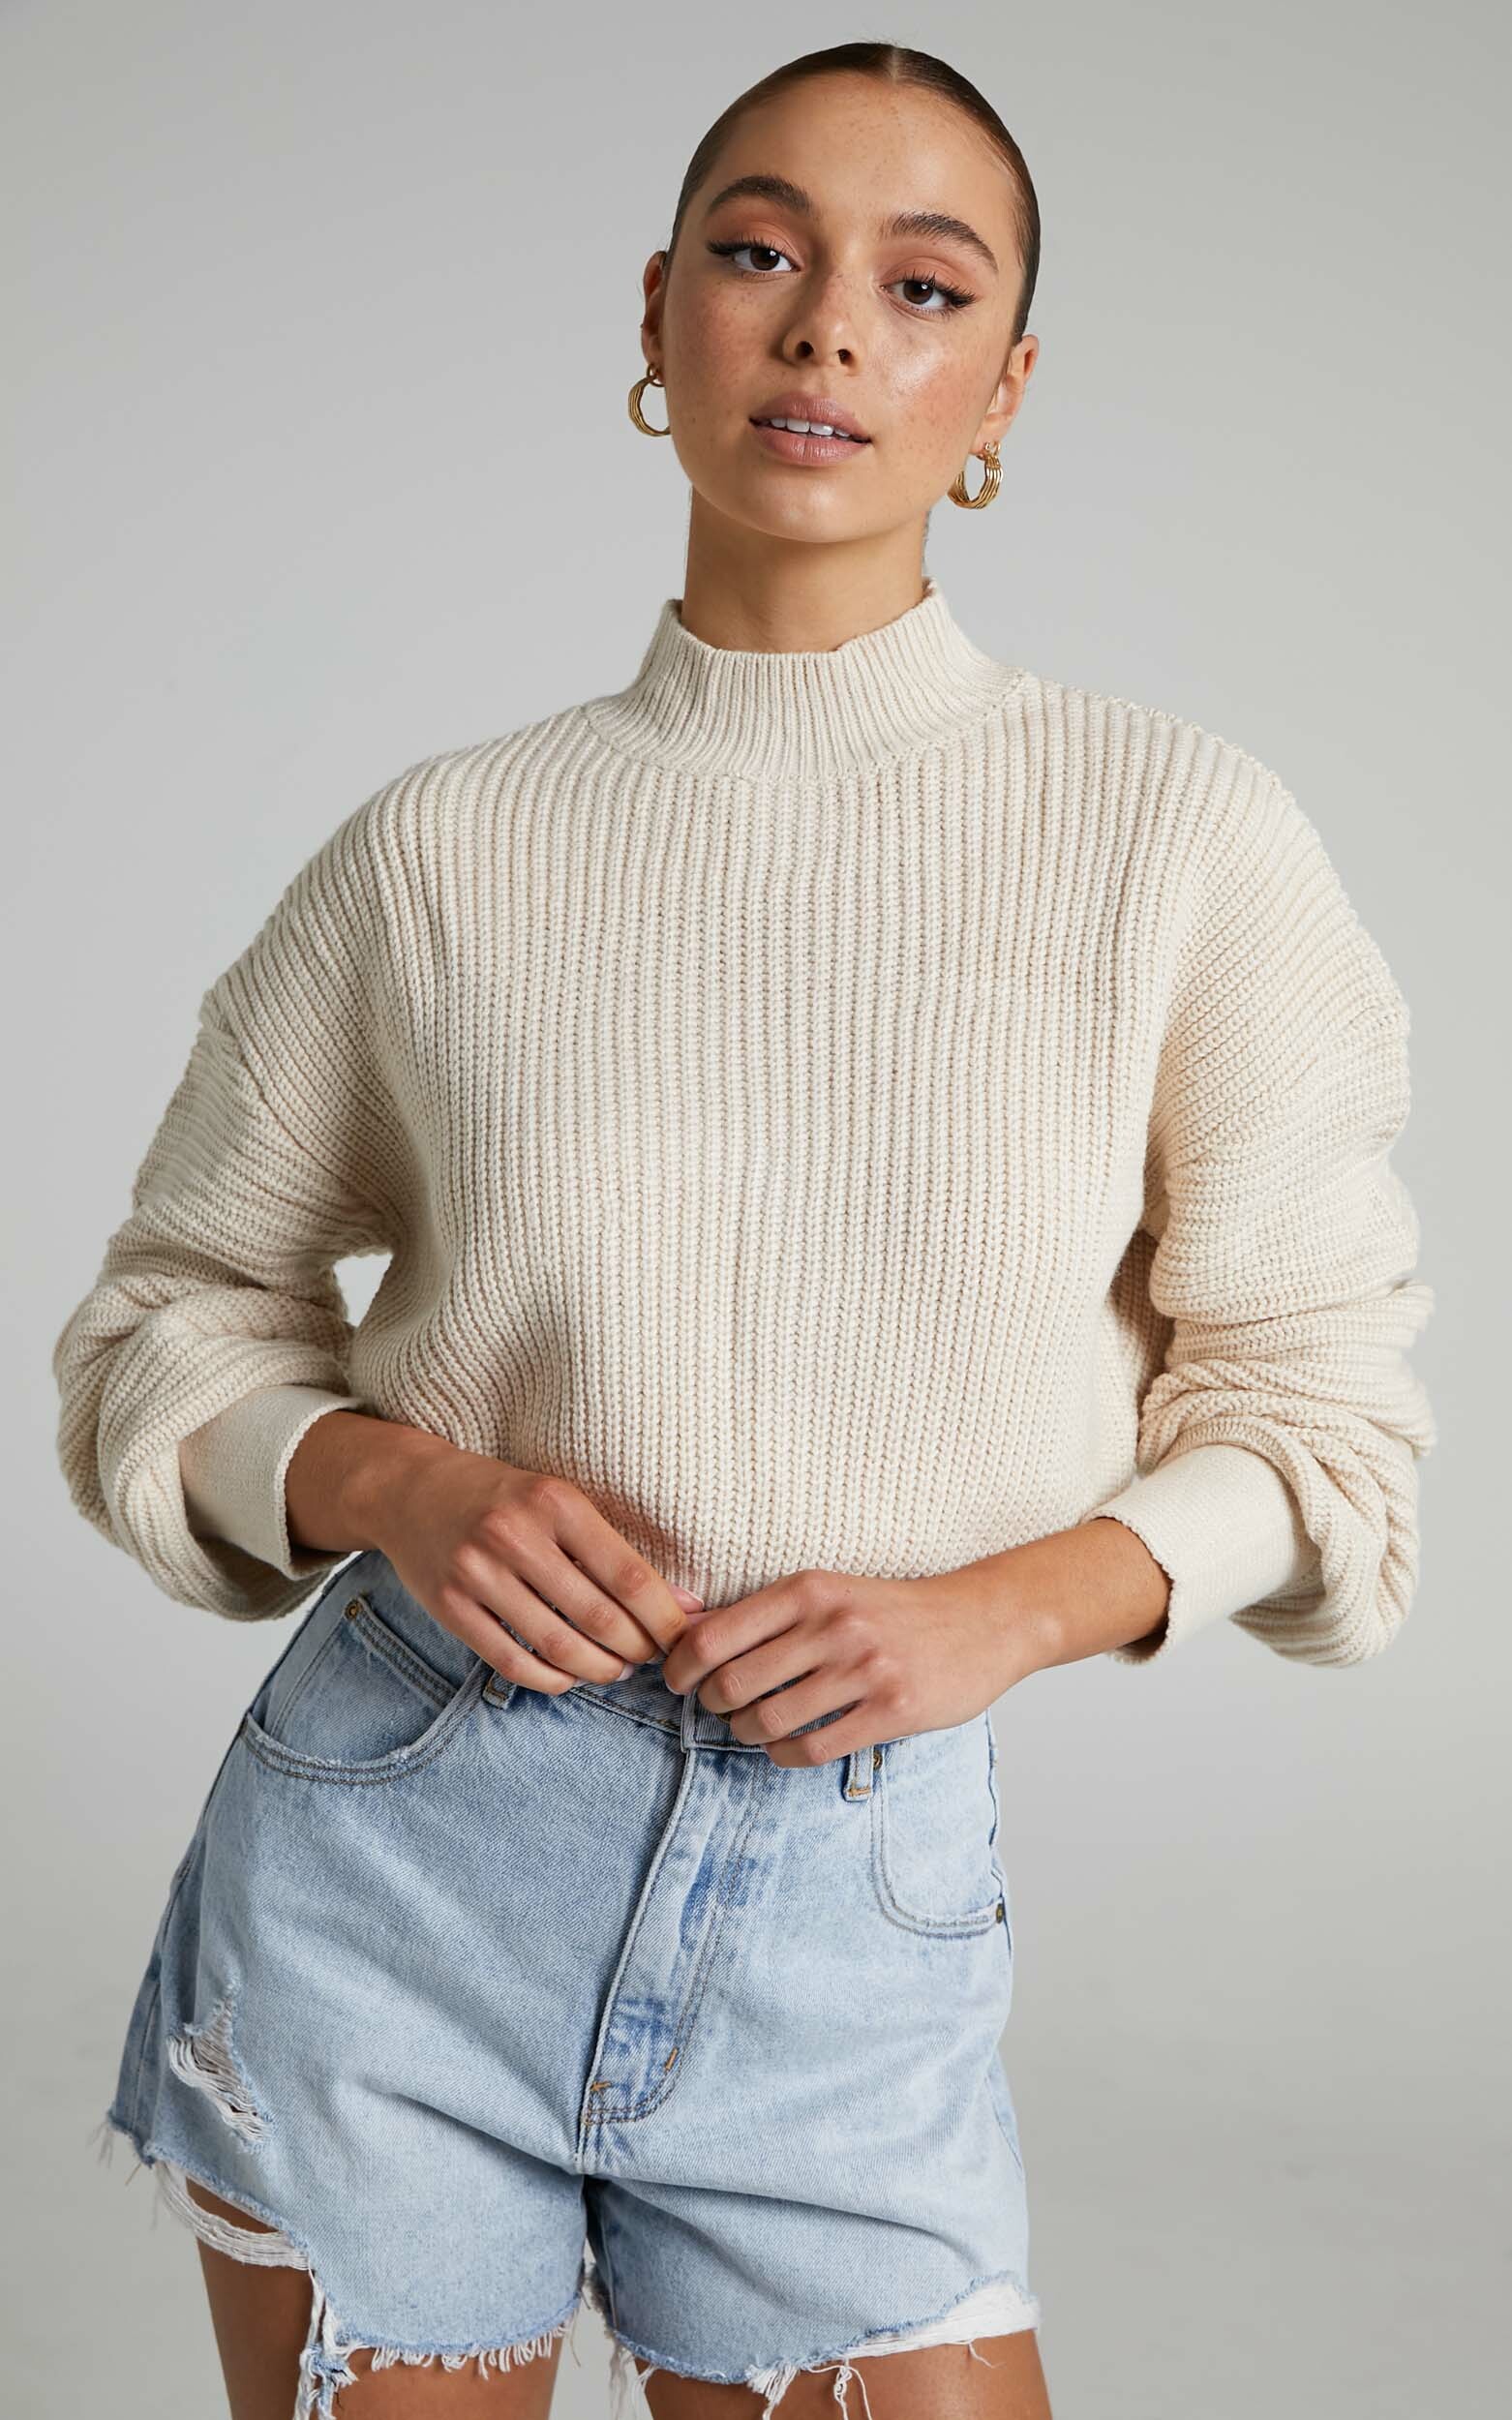 Valerie High Neck Balloon Sleeve Knit Jumper in Cream - 04, CRE1, hi-res image number null